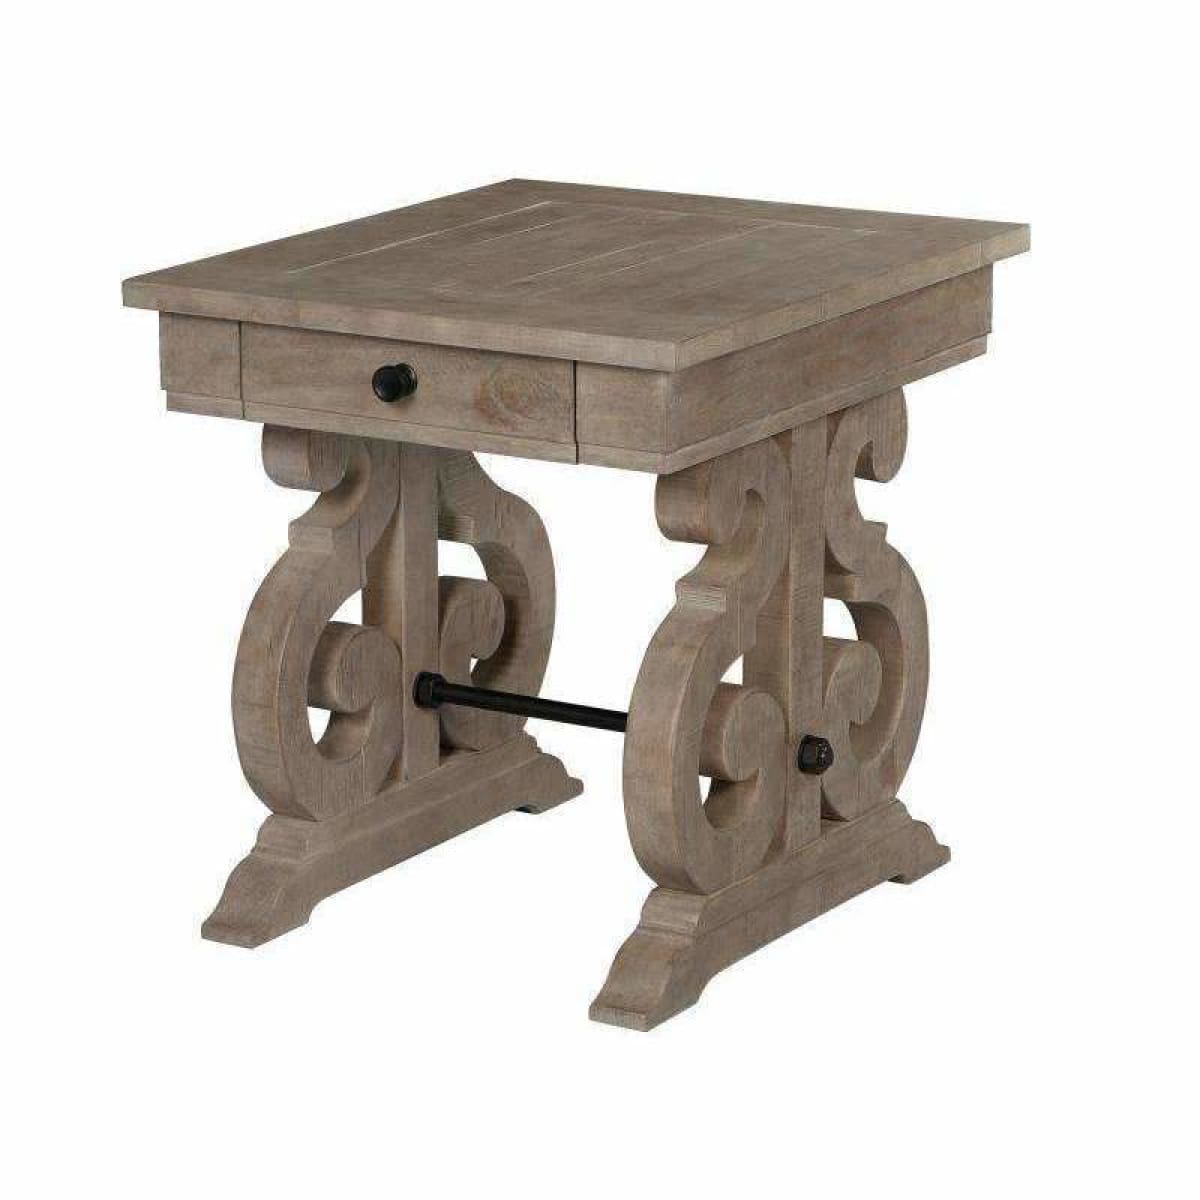 Tinley Park Rectangular End Table - END TABLE/SIDE TABLE